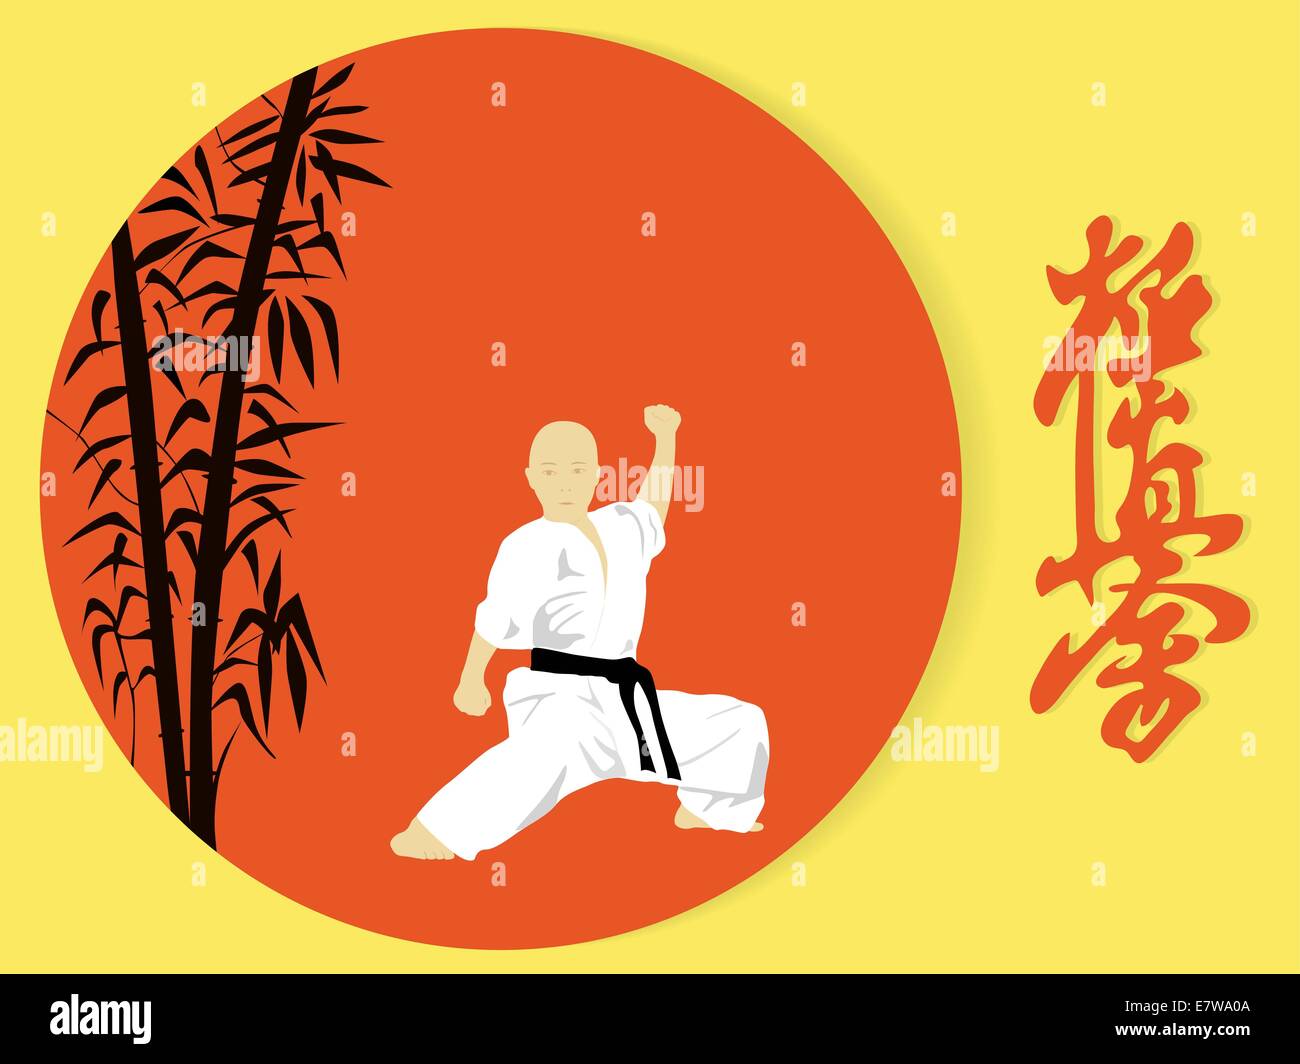 Illustration of a boy engaged in karate on a red background. Inscription on an illustration - a hieroglyph of karate (Japanese) Stock Photo